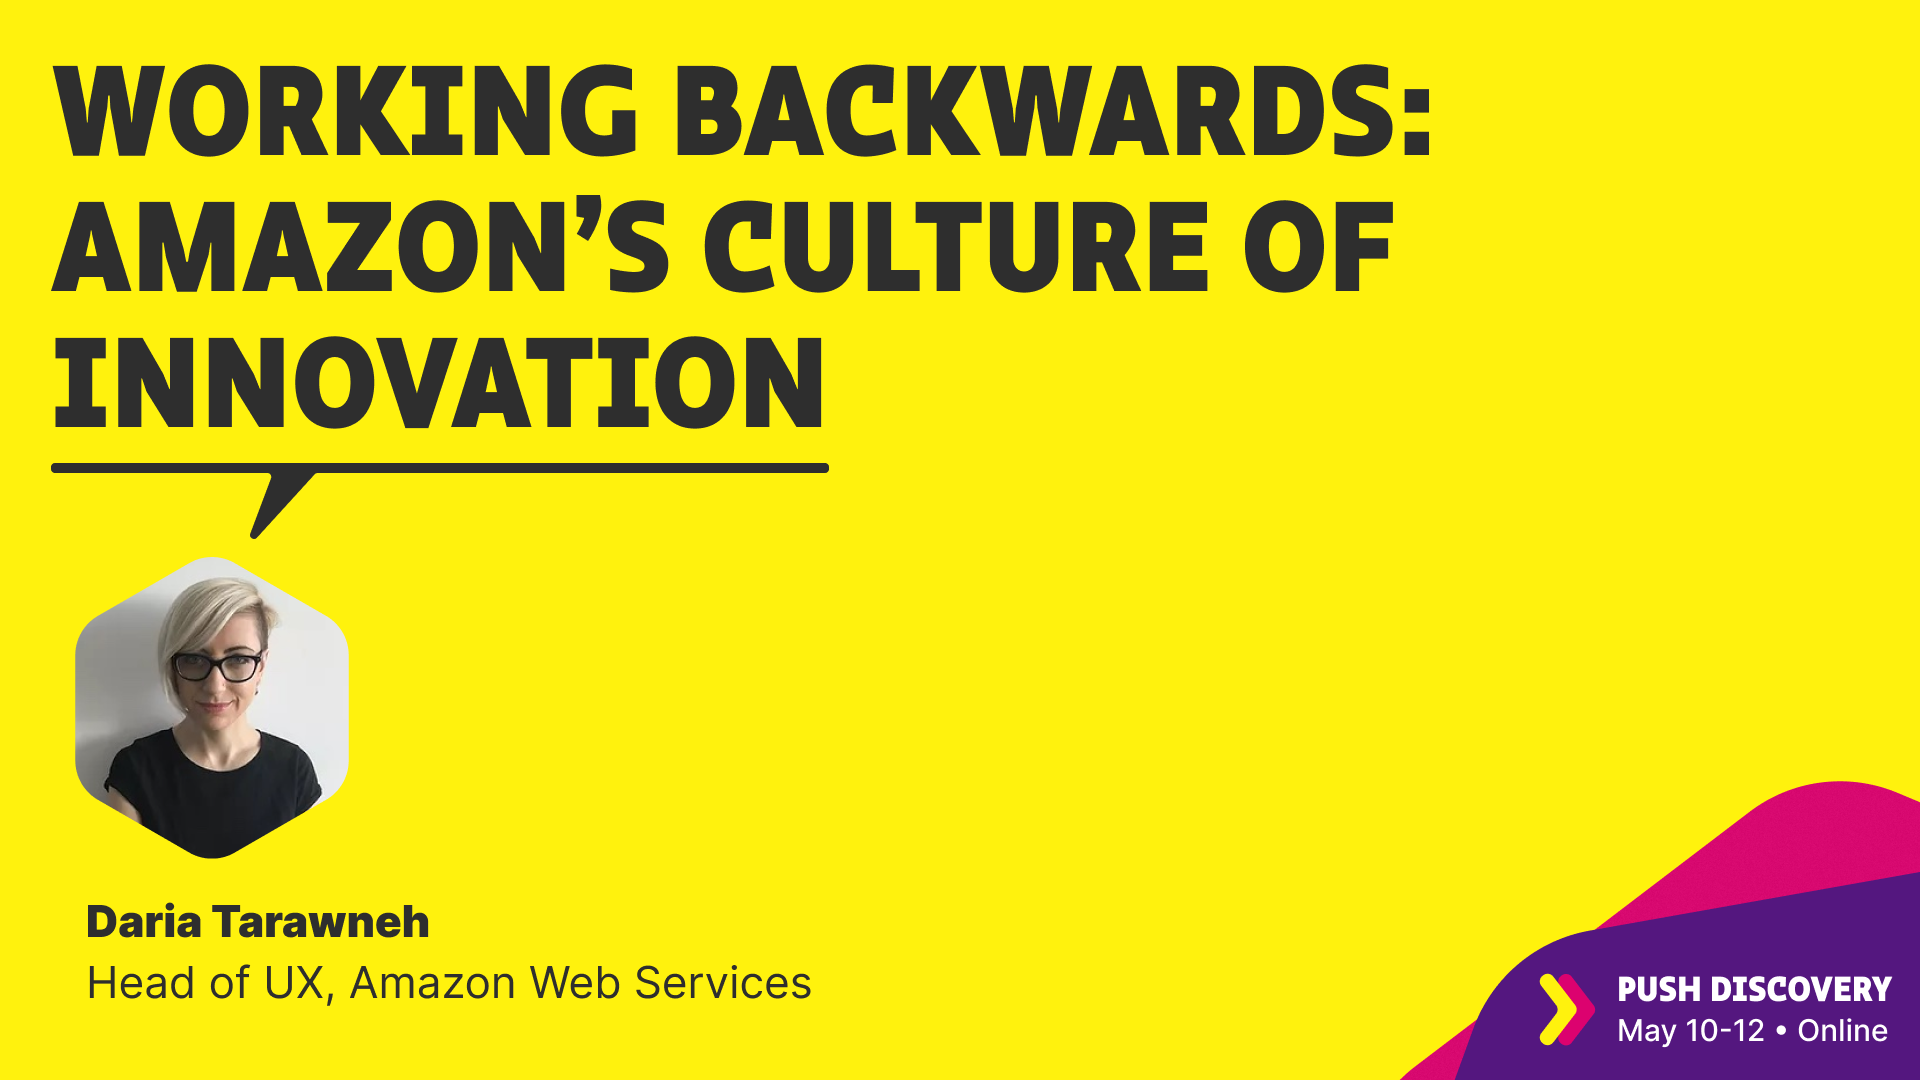 Working backwards: Amazon’s culture of innovation